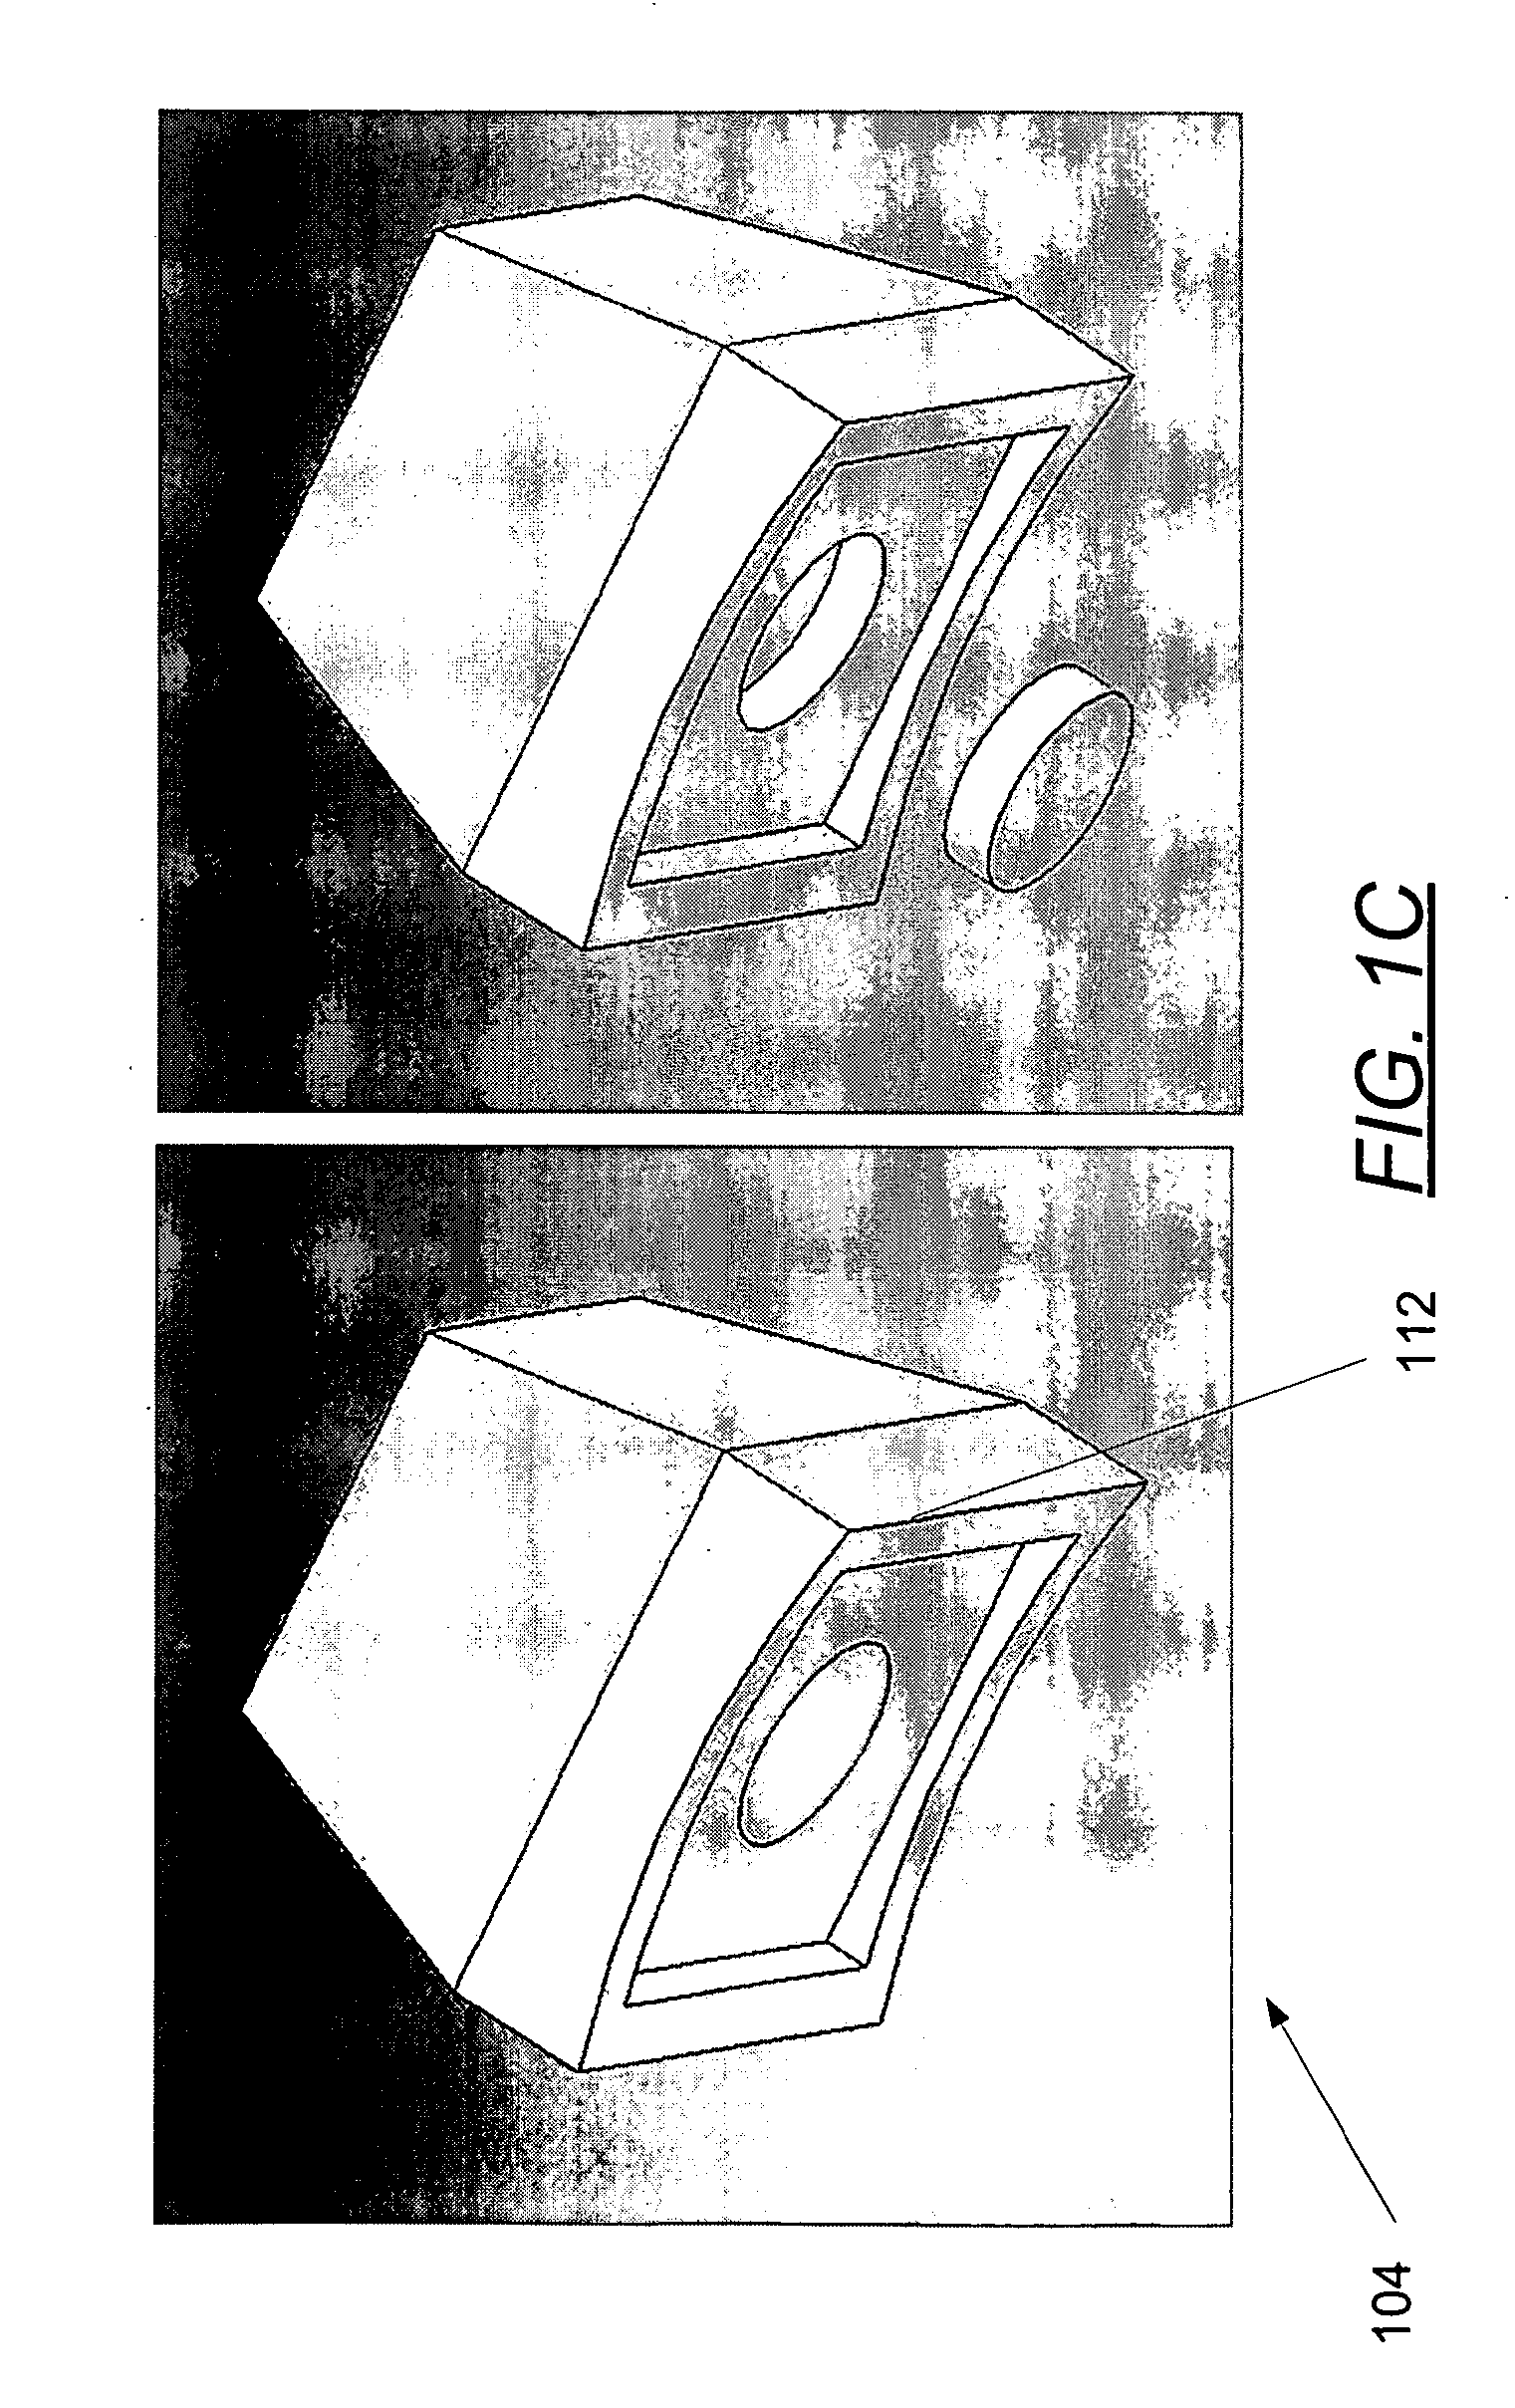 Method and apparatus for the detection of a bone fracture